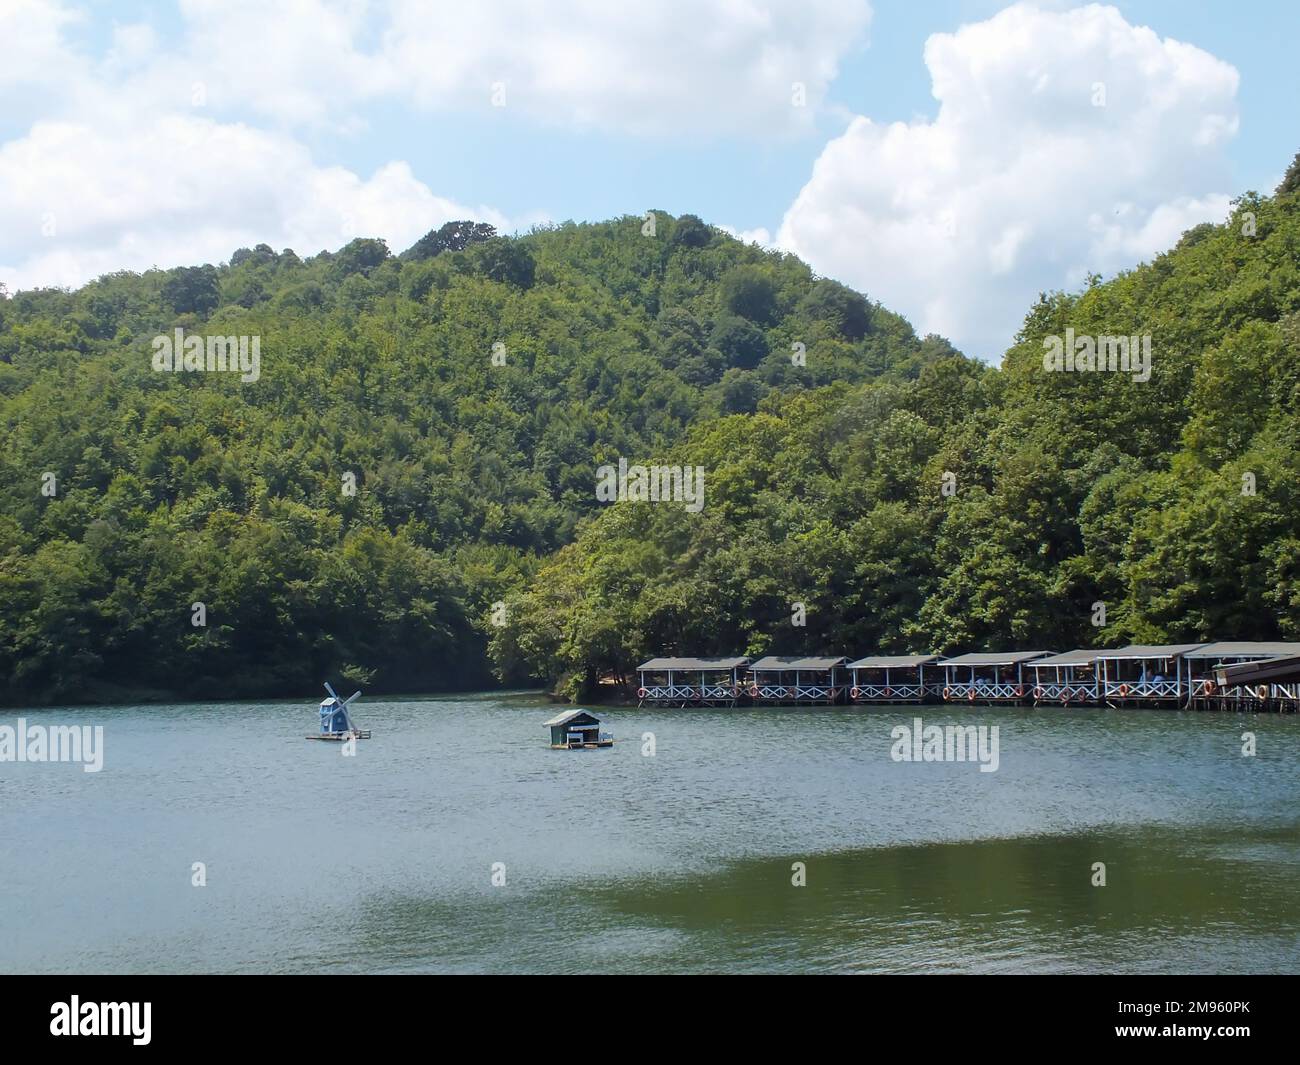 Sakligol, Hidden lake in Sile district of Istanbul Province, Turkey. Peaceful natural lakeside view. Stock Photo